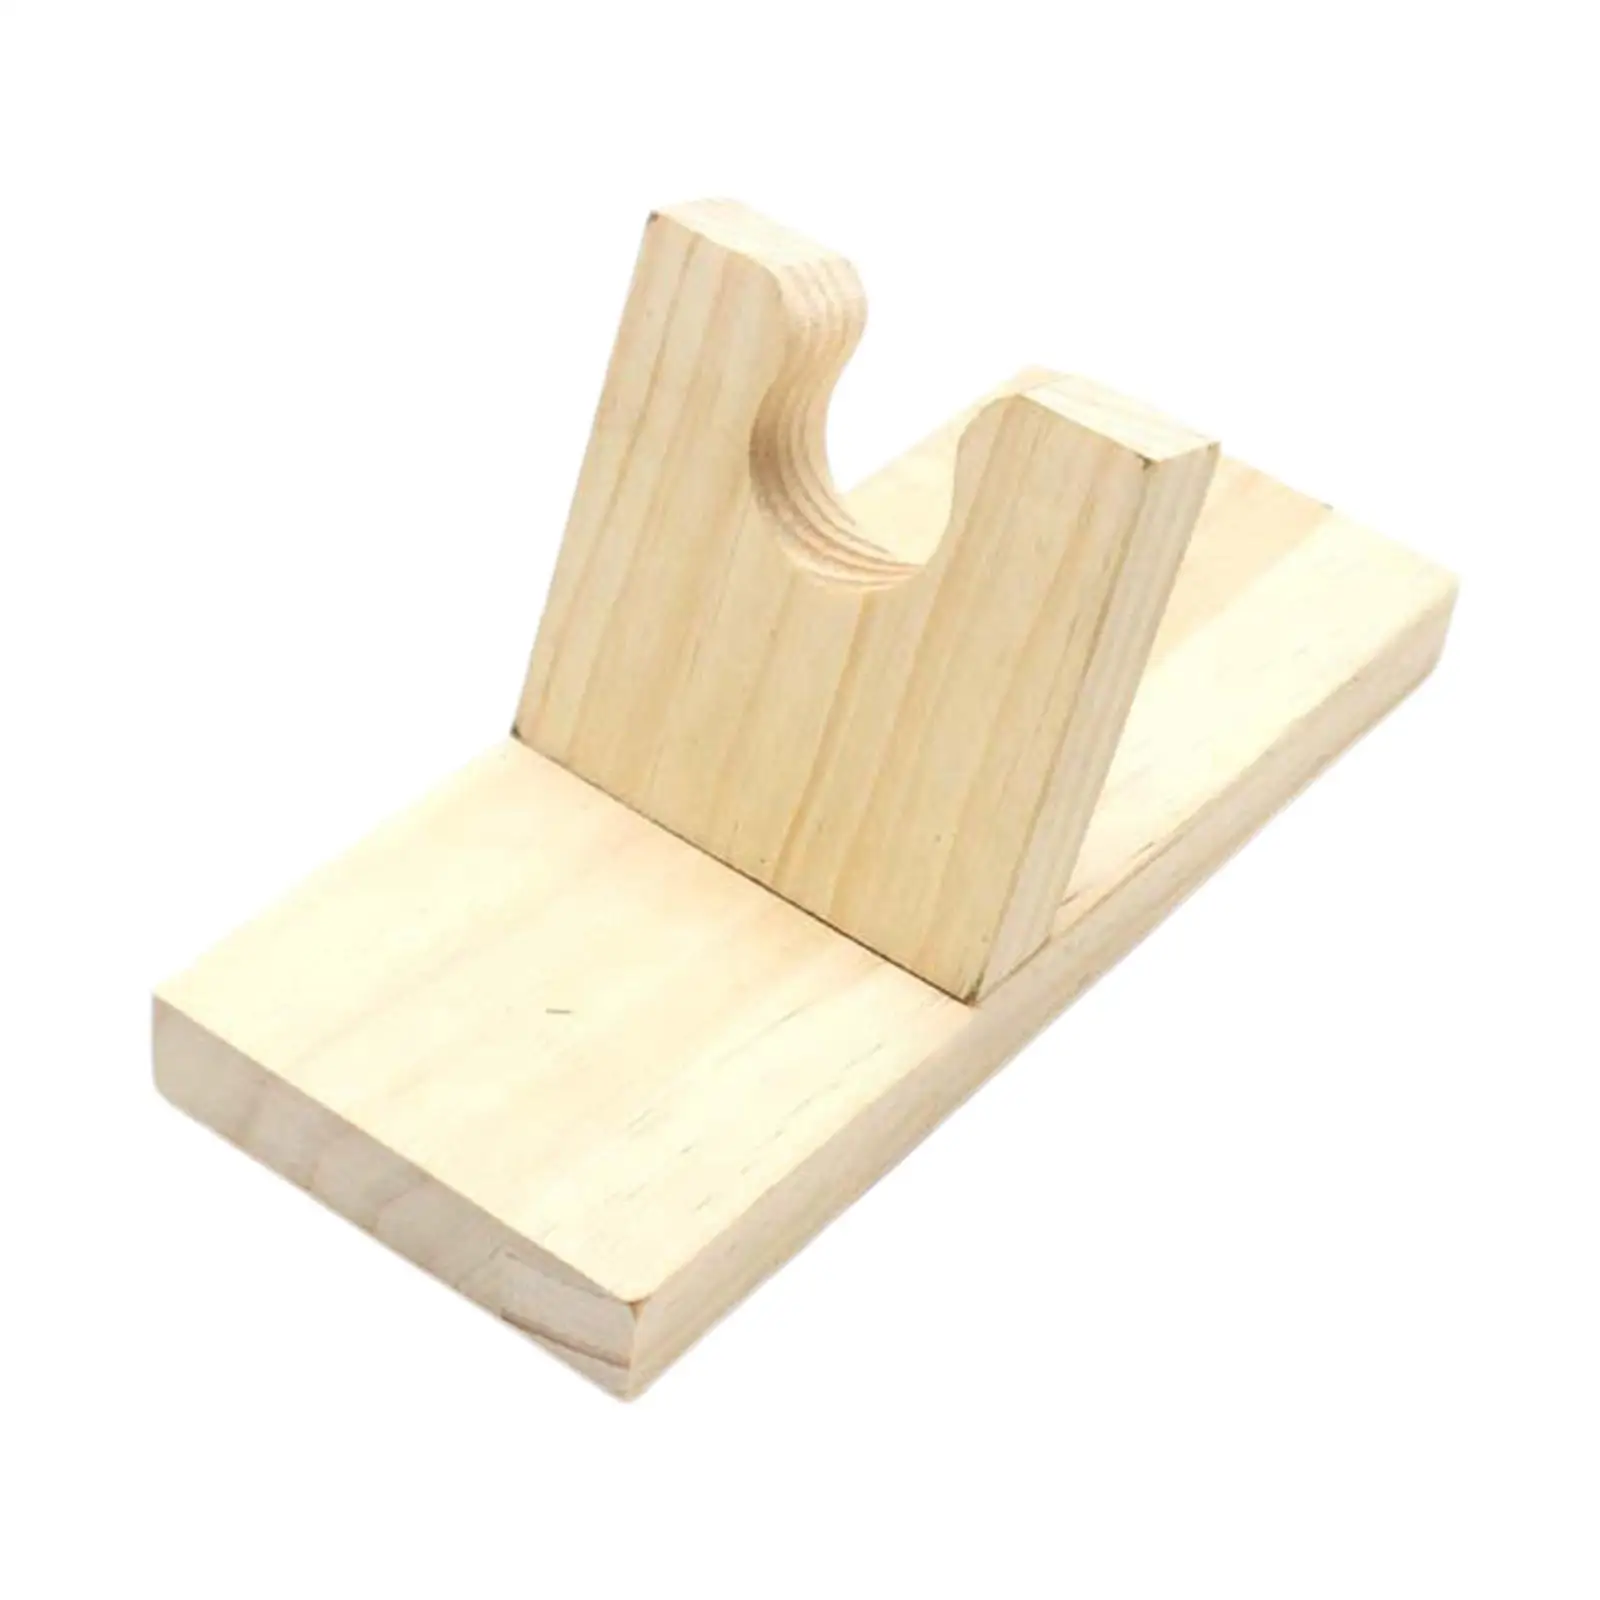 Wooden Hot Melt Glue Gun Support Stand Repair Tools Storage Rack Repair Tools Durable Quick Glue Machine Base for Household Home